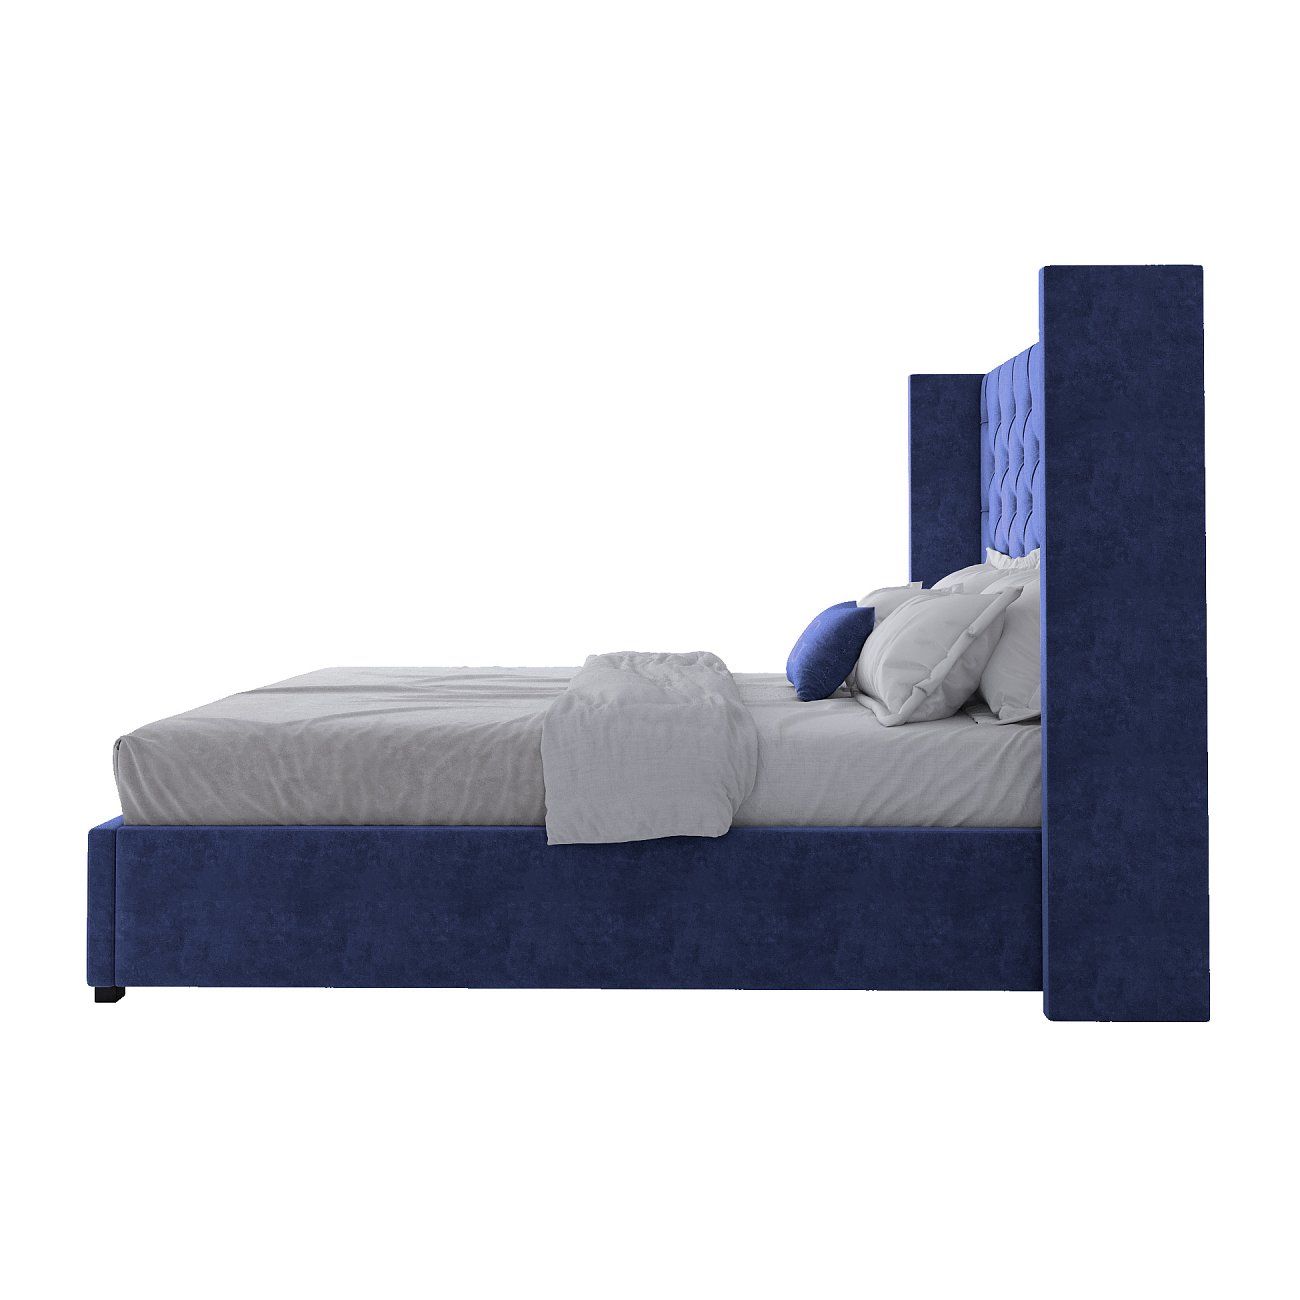 Double bed 160x200 cm blue velour with carriage tie without studs Wing-2